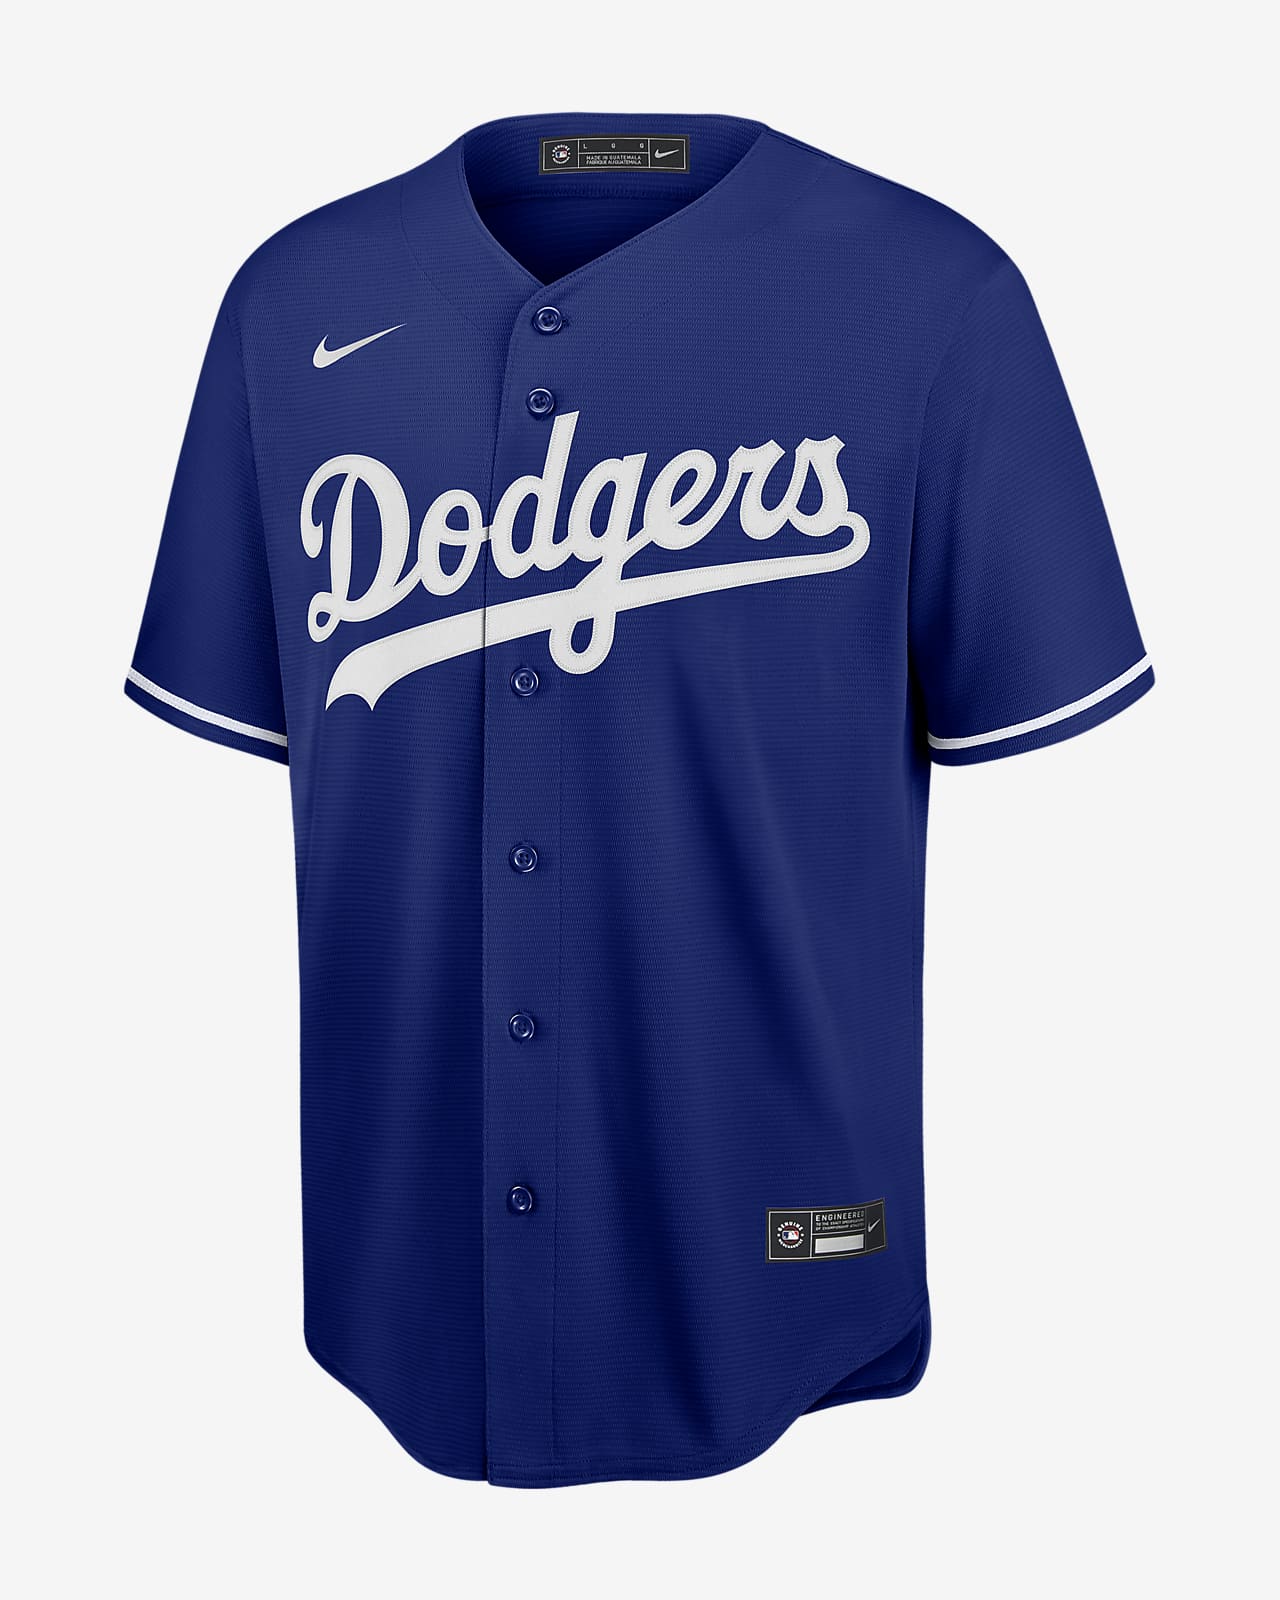 dodger mexico jersey for cheap where to buy b3a65 f753b